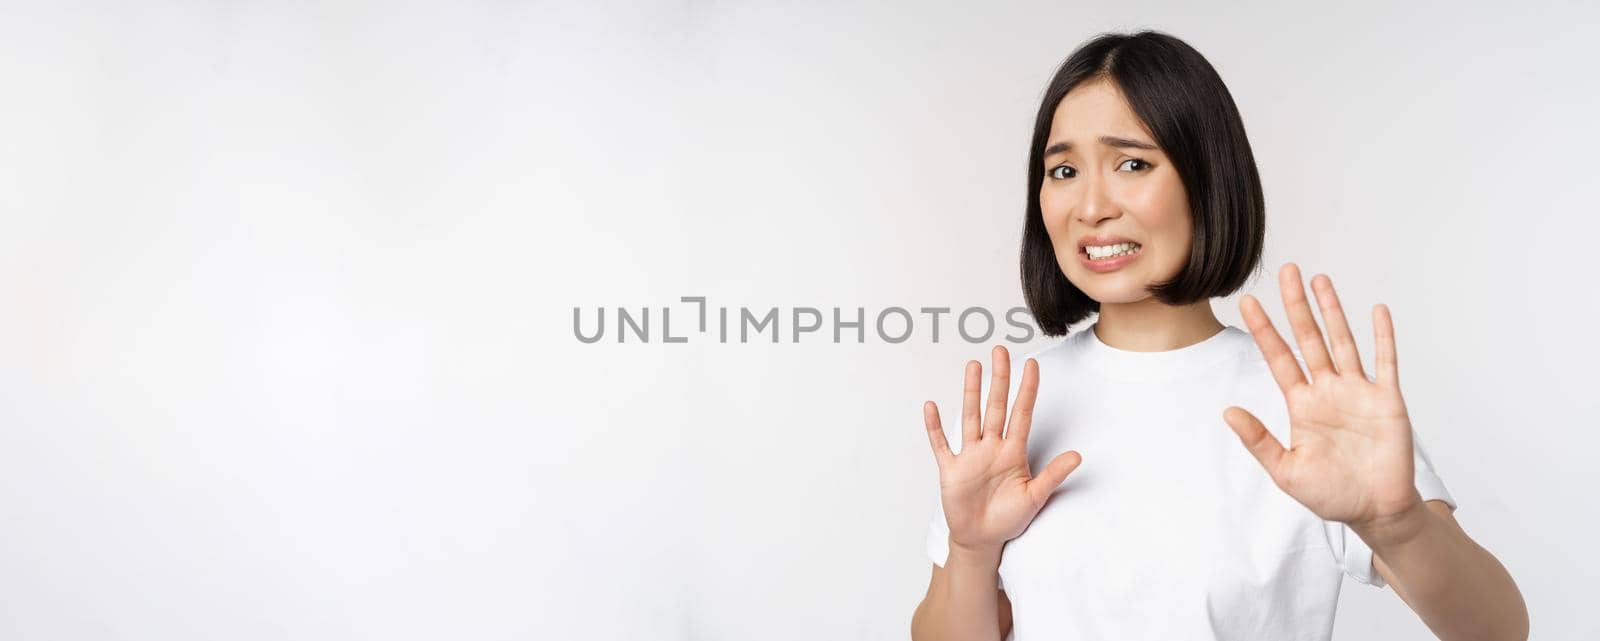 Disgusted asian woman rejecting smth, grimacing from dislike and aversion, stare with cringe, refusing offer, standing over white background.